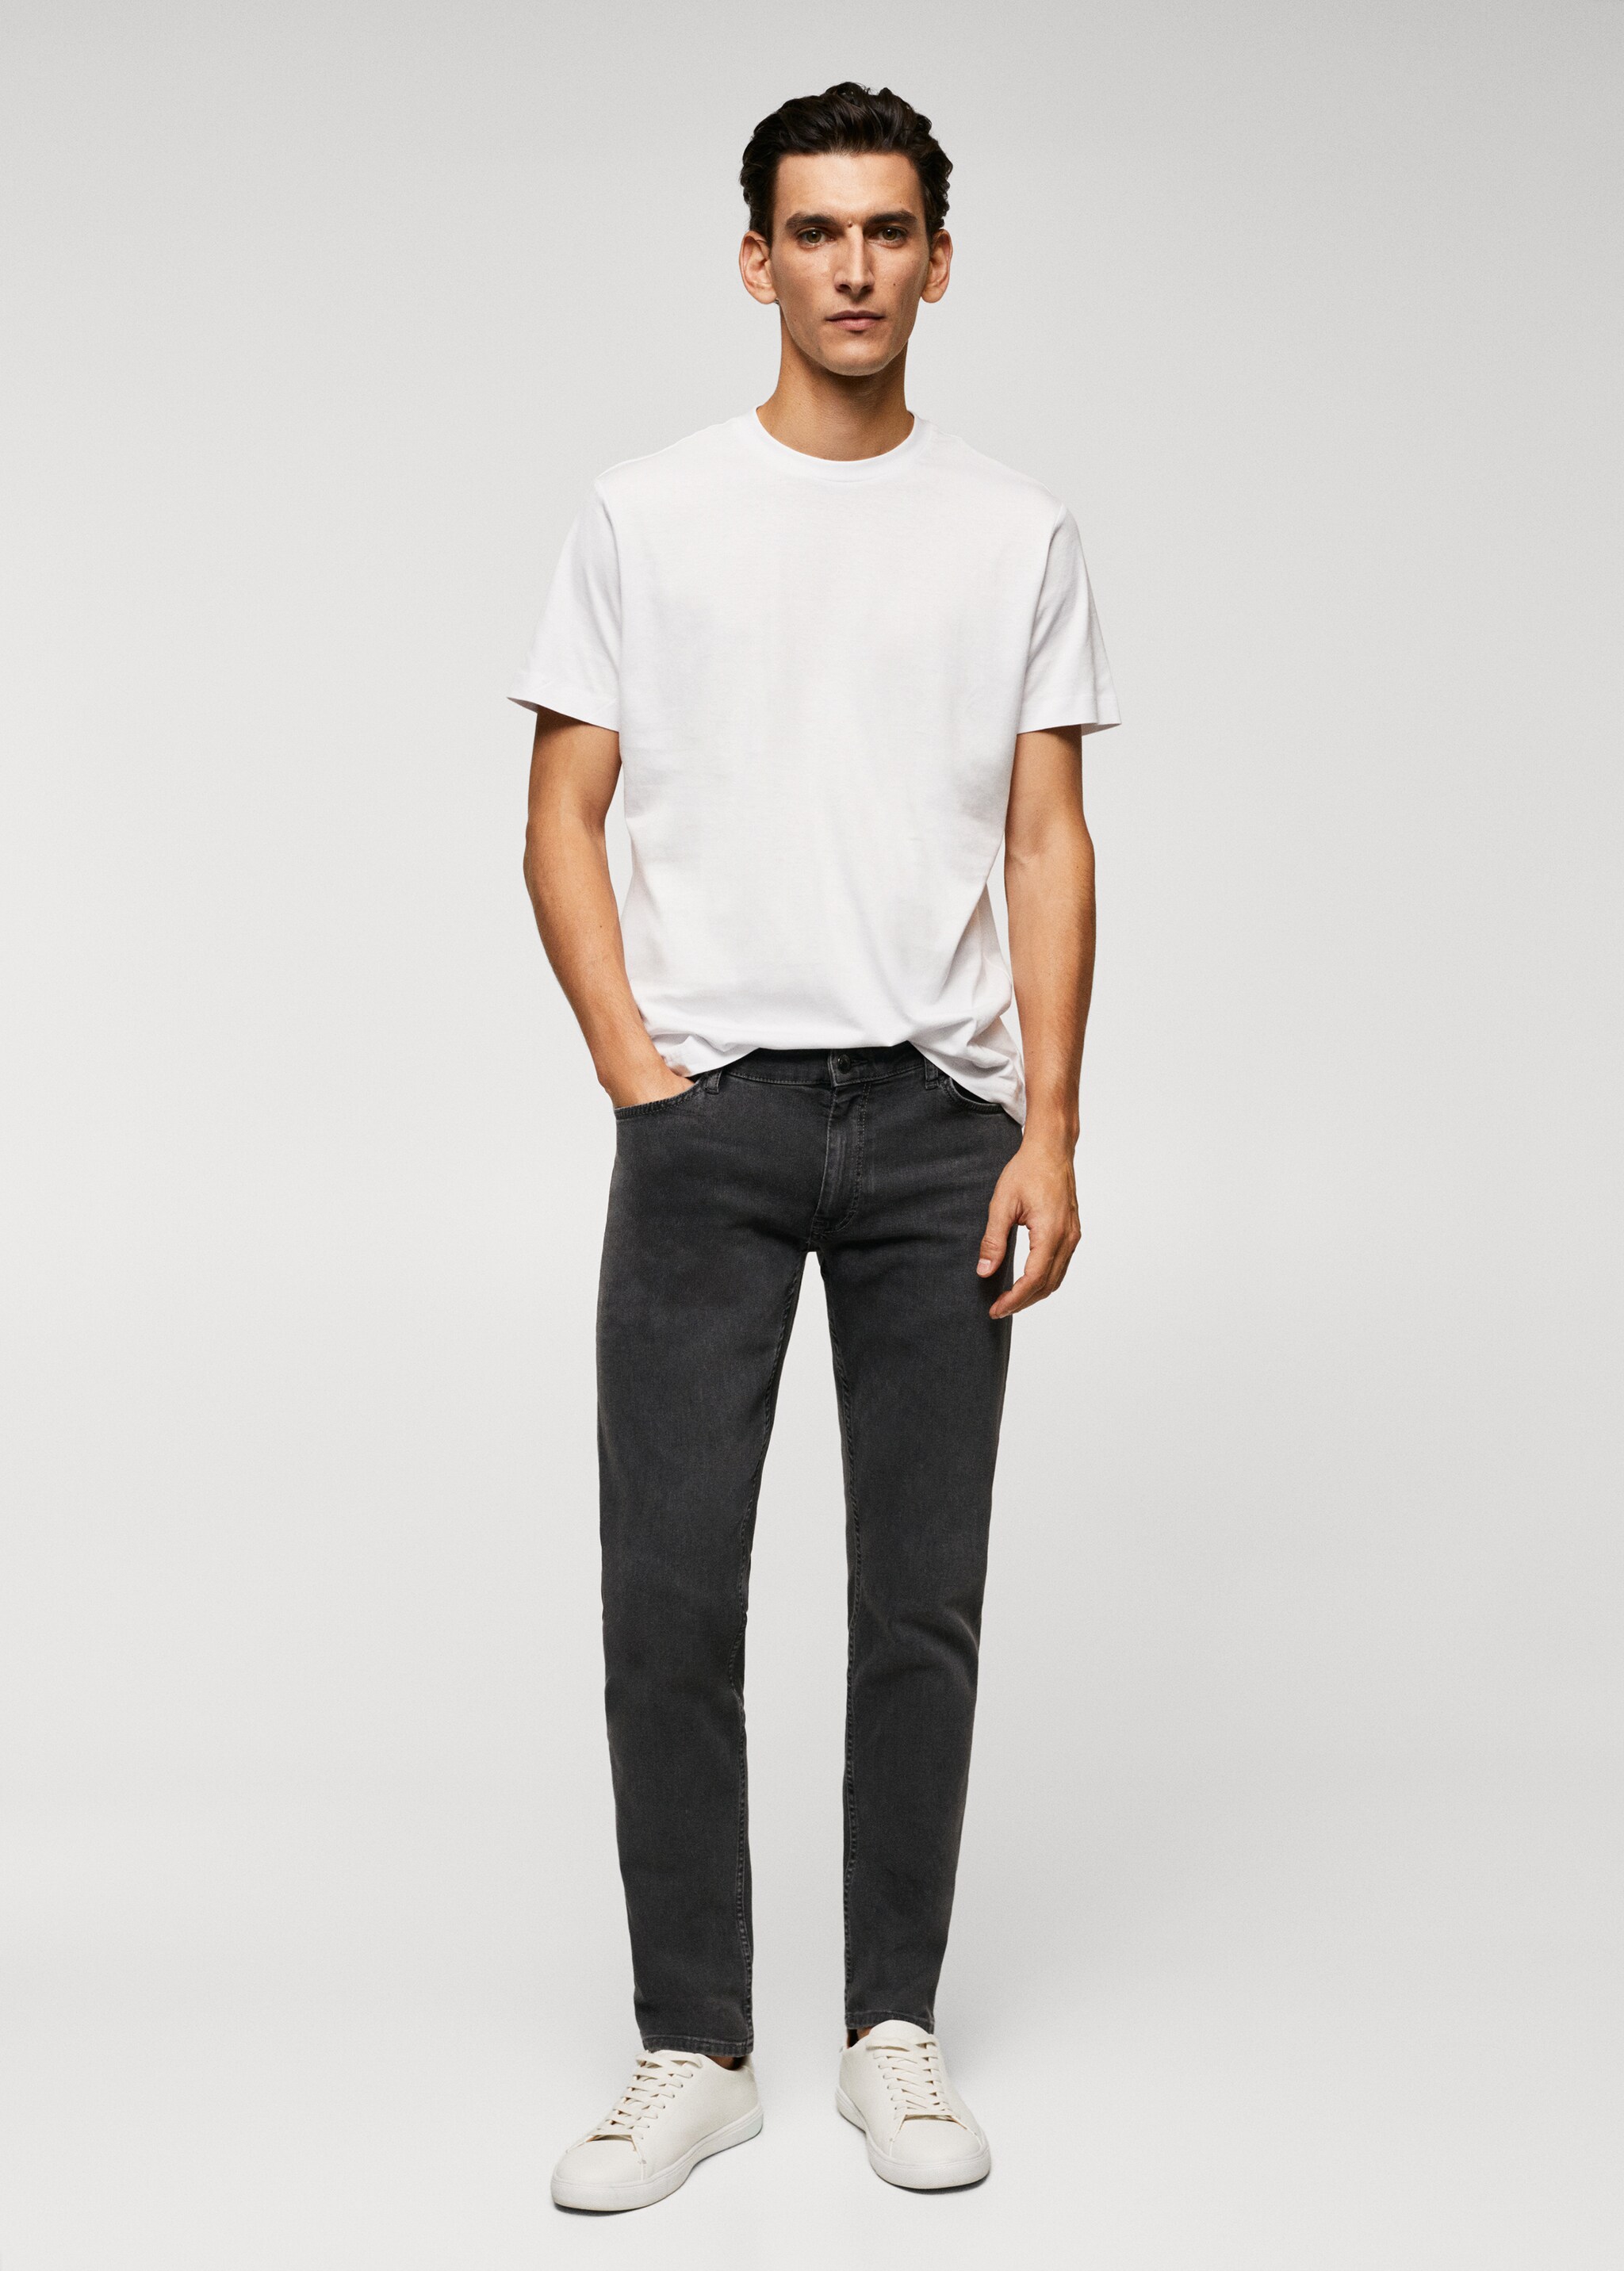 Slim fit Ultra Soft Touch Patrick jeans - General plane